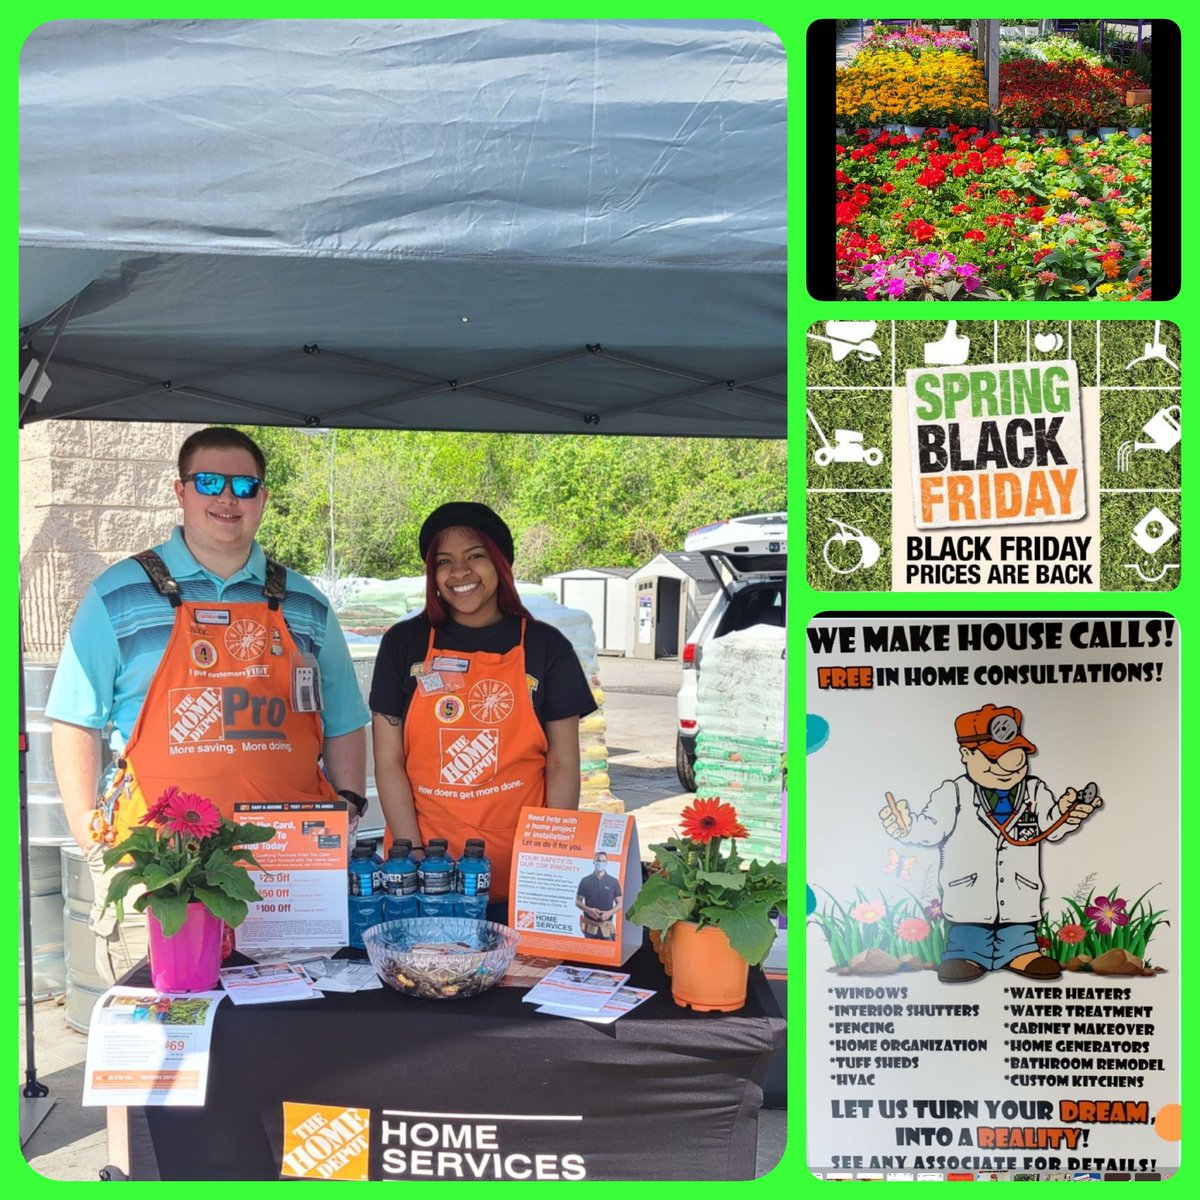 SPRING BLACK FRIDAY LEAD EVENT! All hands on deck, Thank you to our Pro Supervisor Nick & ASDS Lexi, driving leads with their smiles. #OneTeamOneDream @HillaryHyatt @kmn293 @THDHynes